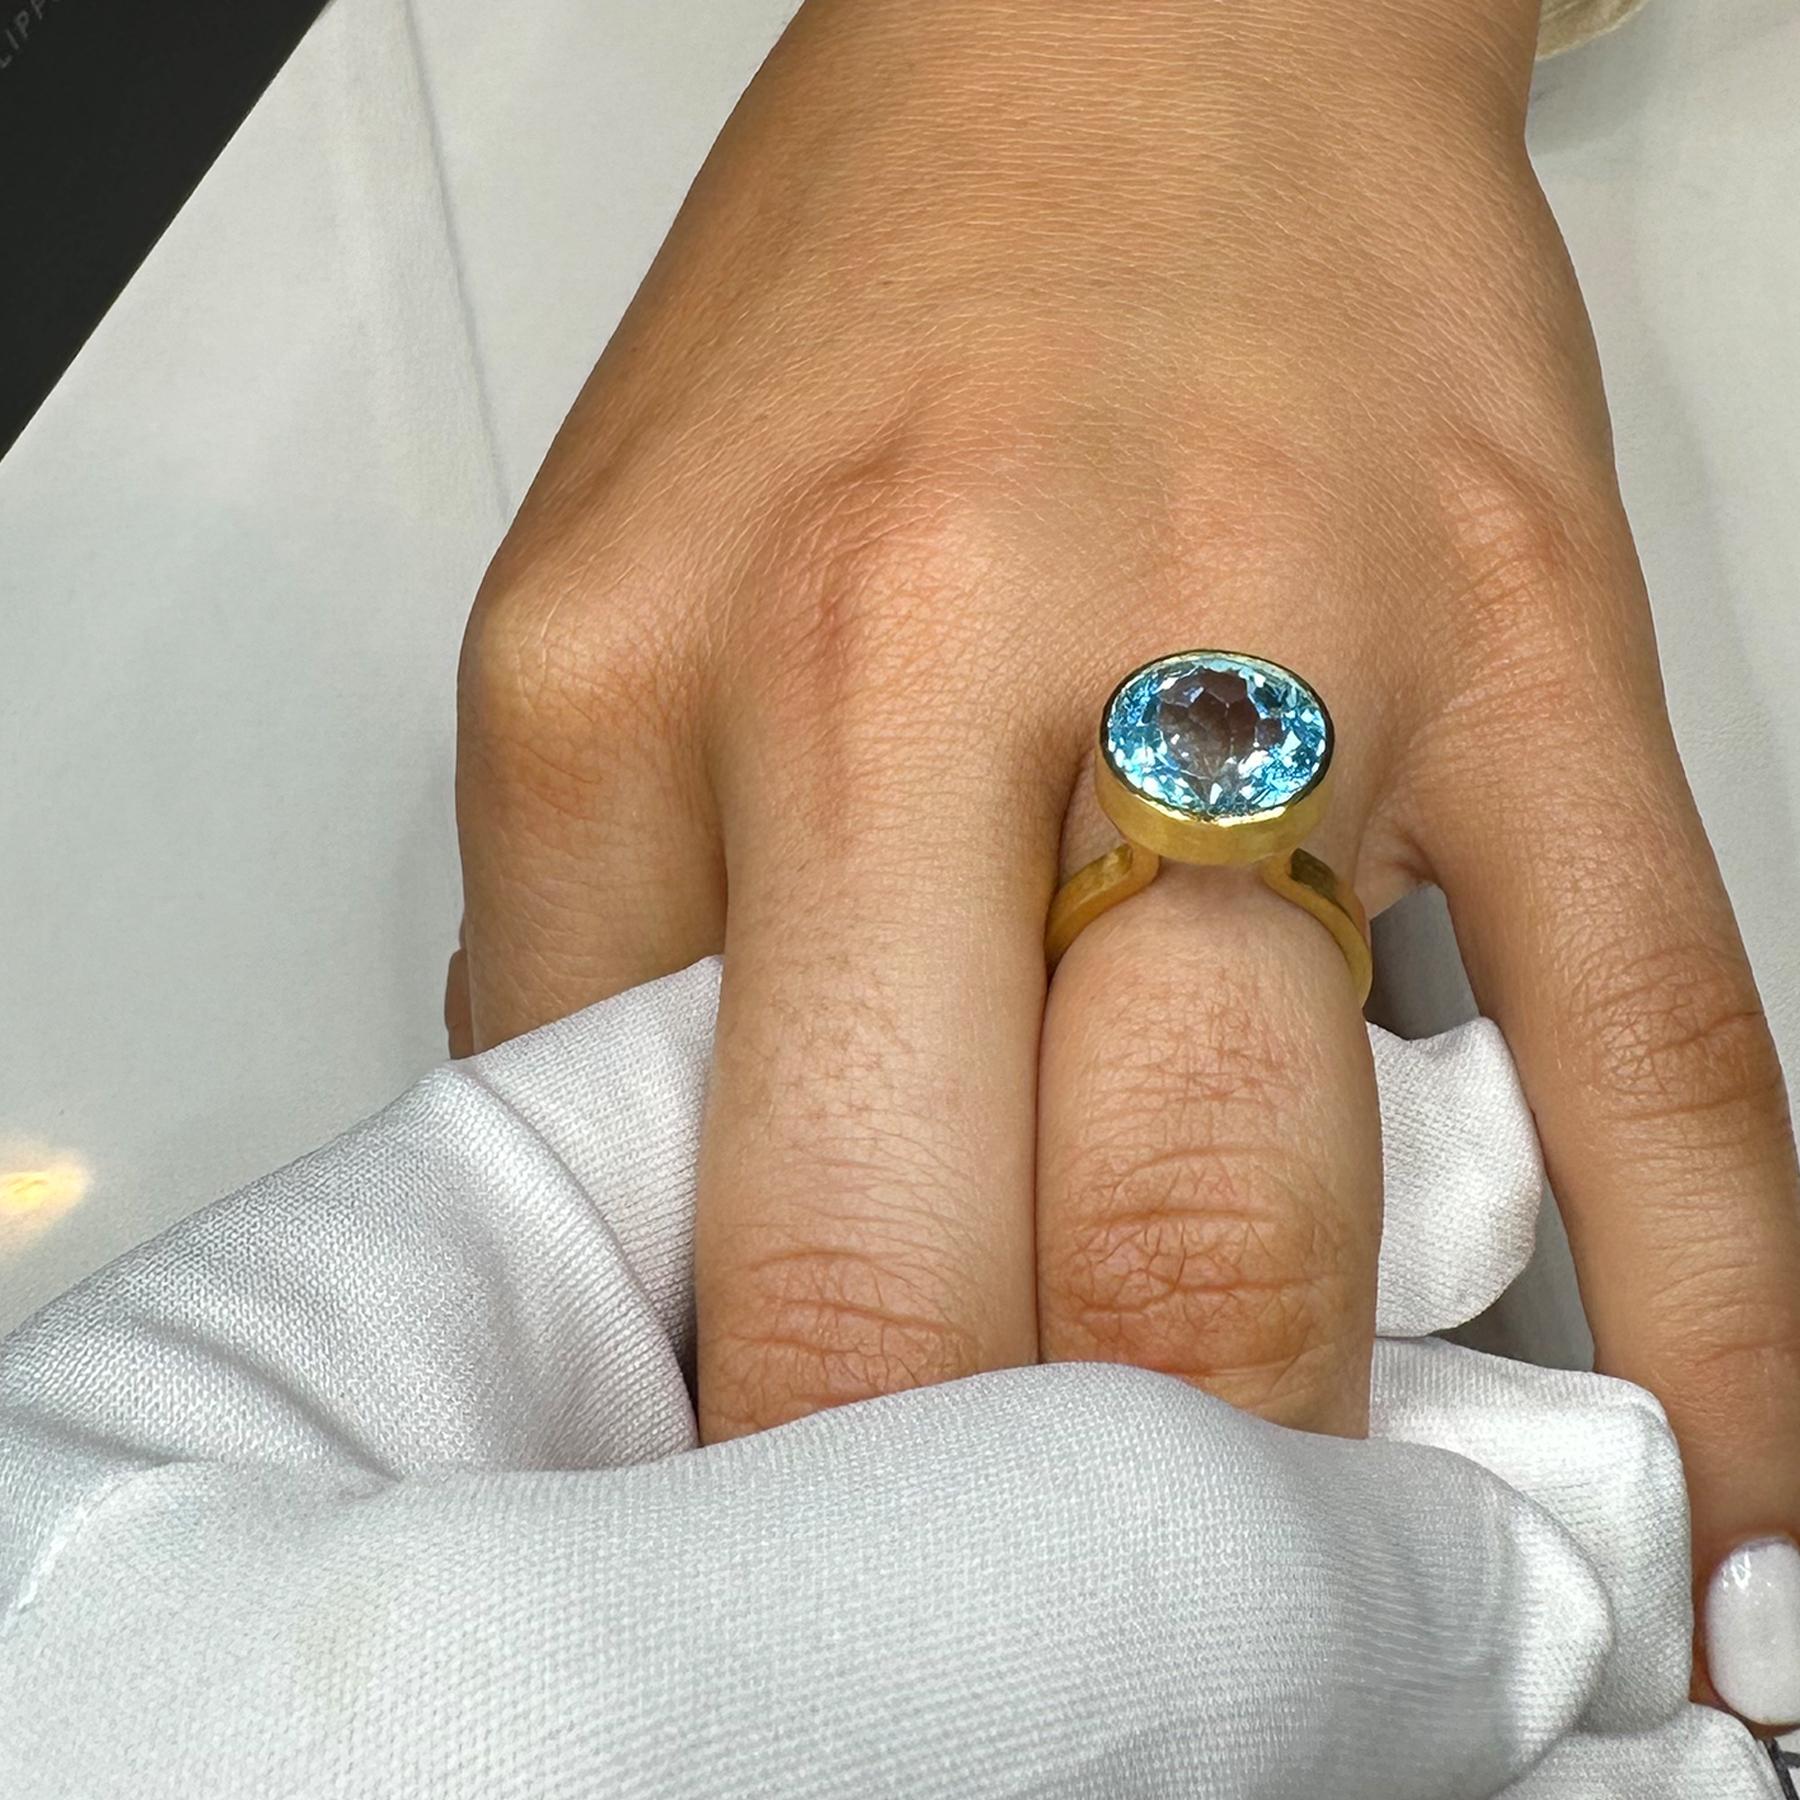 PHILIPPE SPENCER 11.05 Ct. Blue Topaz in 22K and 20K Gold Statement Ring In New Condition For Sale In Key West, FL